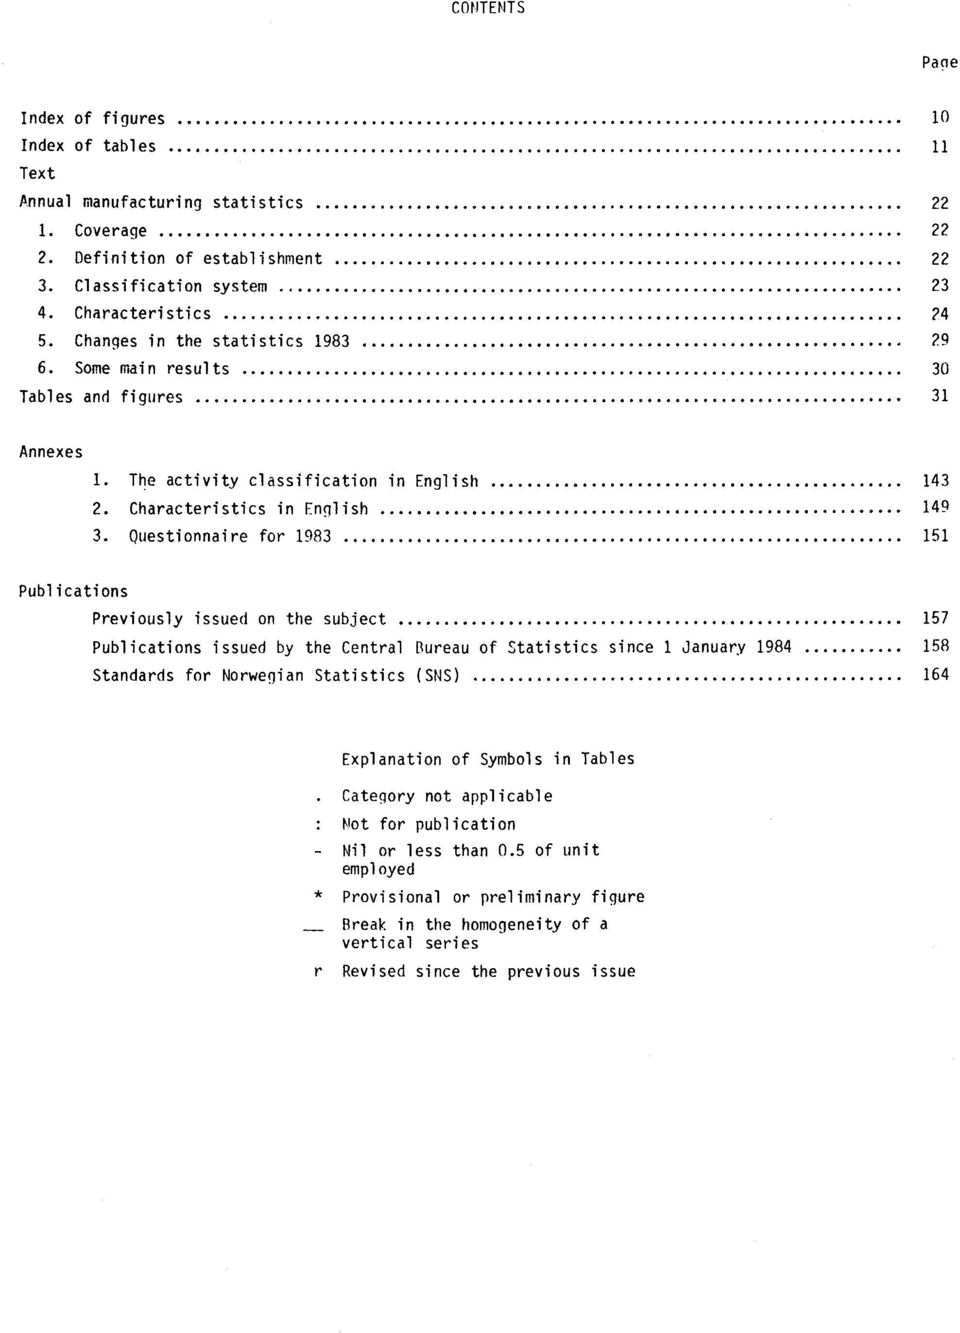 Questionnaire for 1983 151 Publications Previously issued on the subject 157 Publications issued by the Central Bureau of Statistics since 1 January 1984 158 Standards for Norwegian Statistics (SNS)